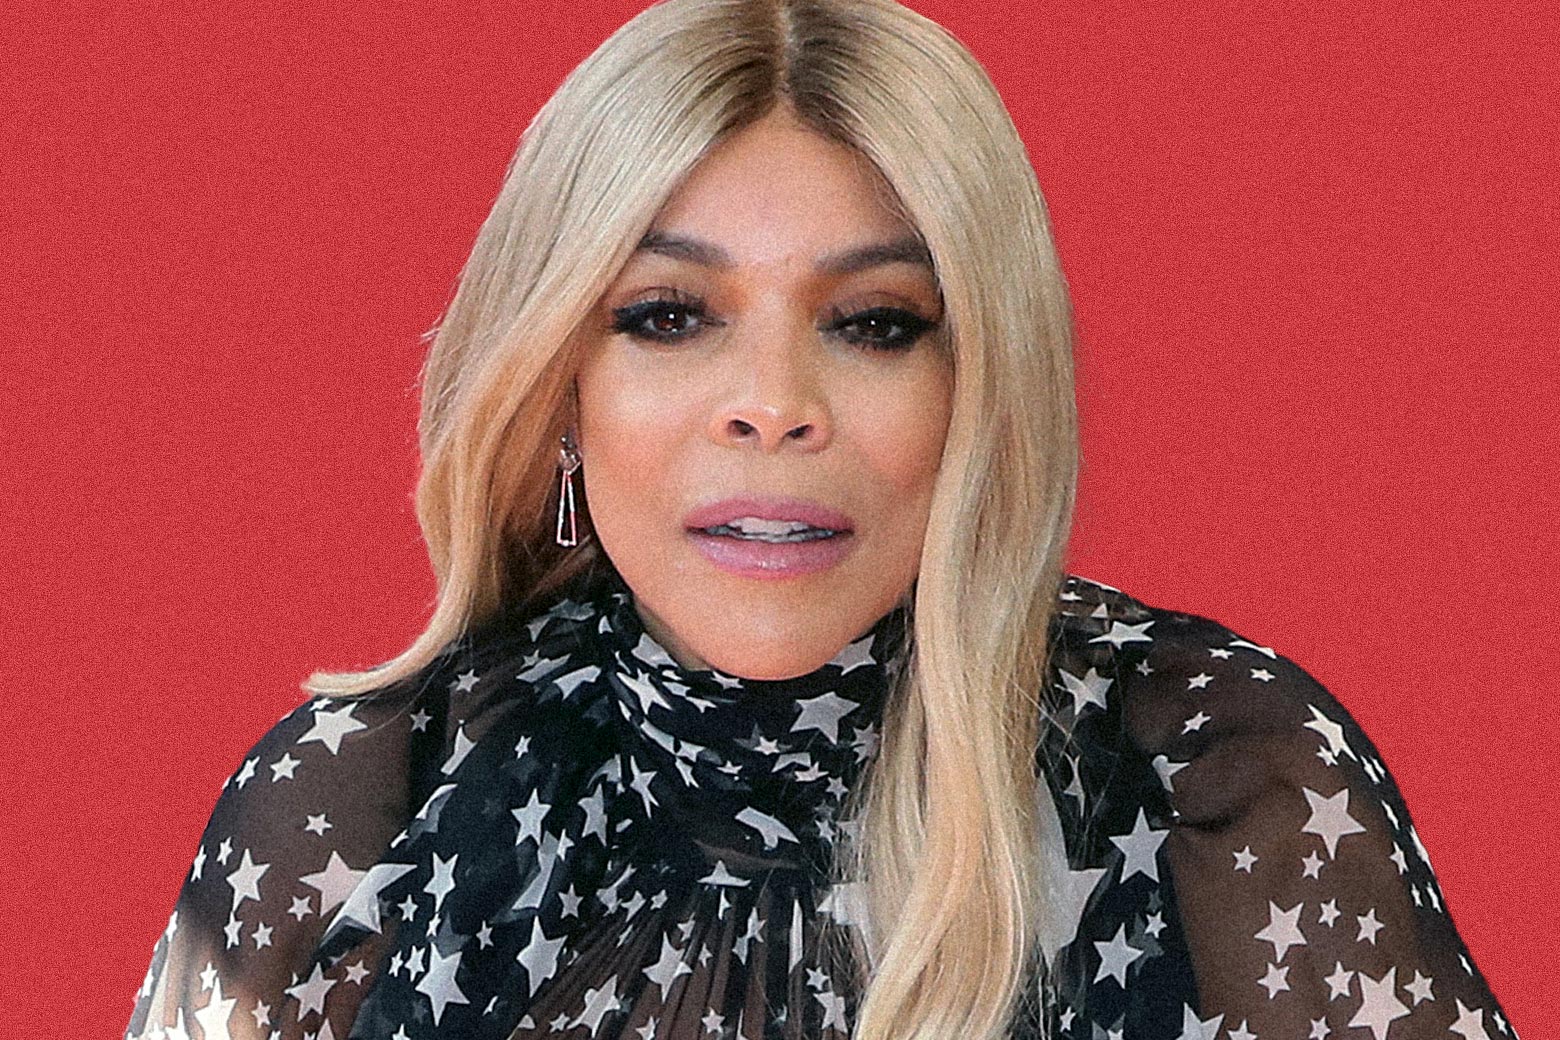 Wendy Williams against a red background.